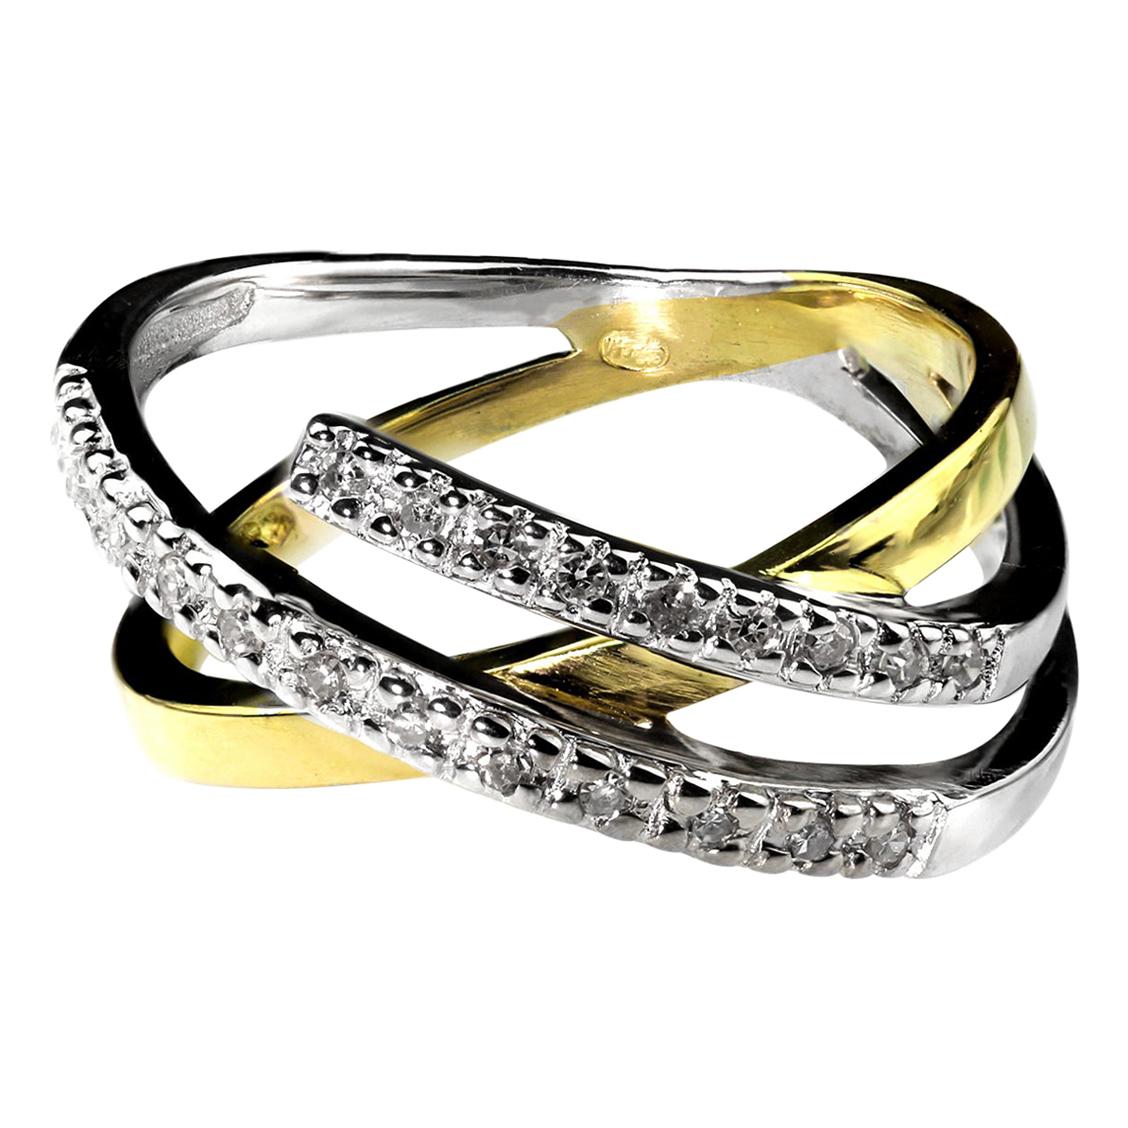 Abstract Design Diamond Ring Set in 18 Carat Yellow and White Gold, French For Sale